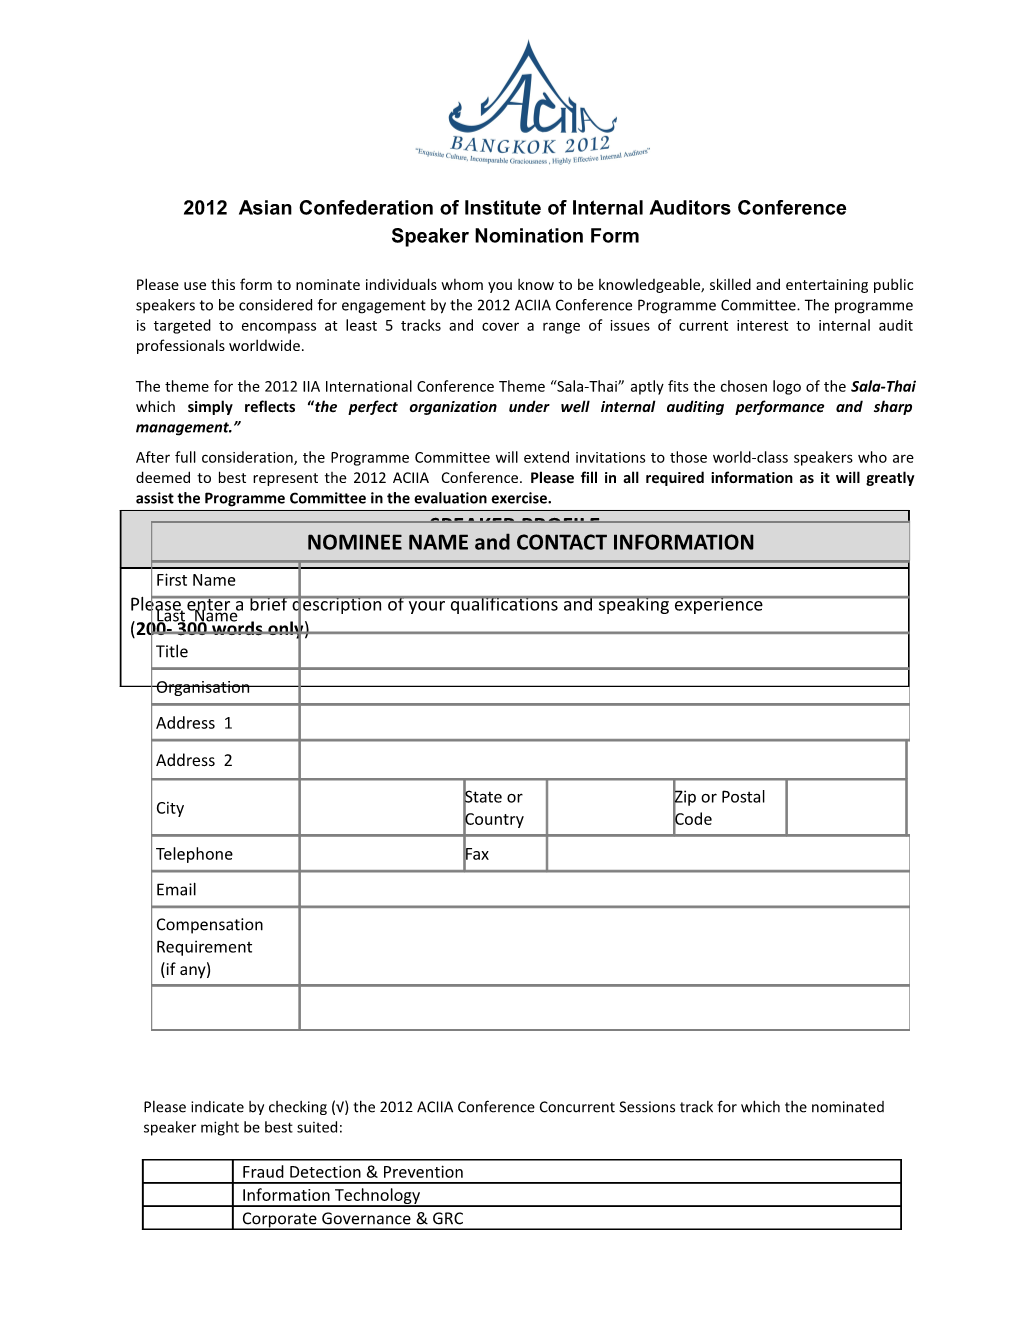 2012 Asian Confederation of Institute of Internal Auditors Conference